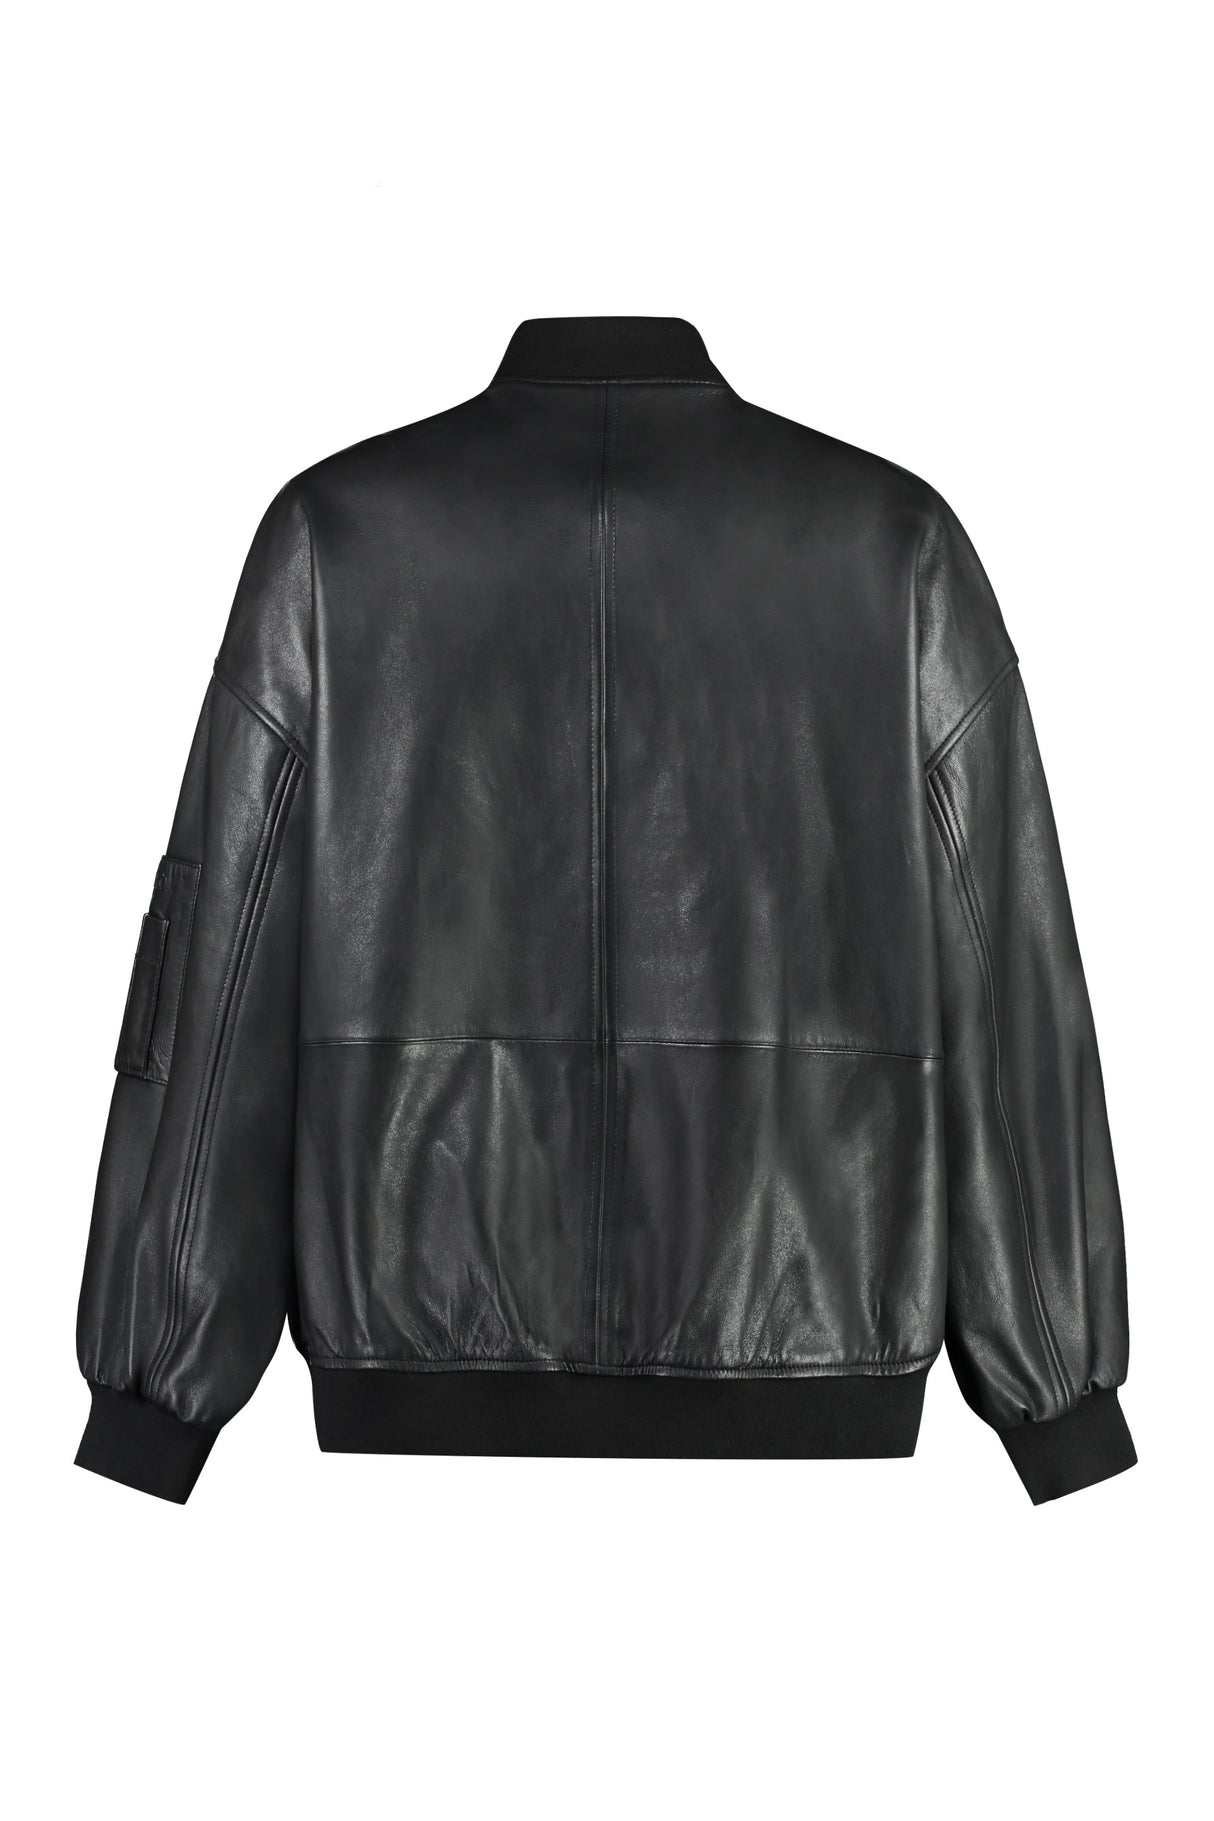 PINKO Black Leather Jacket for Women with Zipped and Pen Pockets and Ribbed Edges